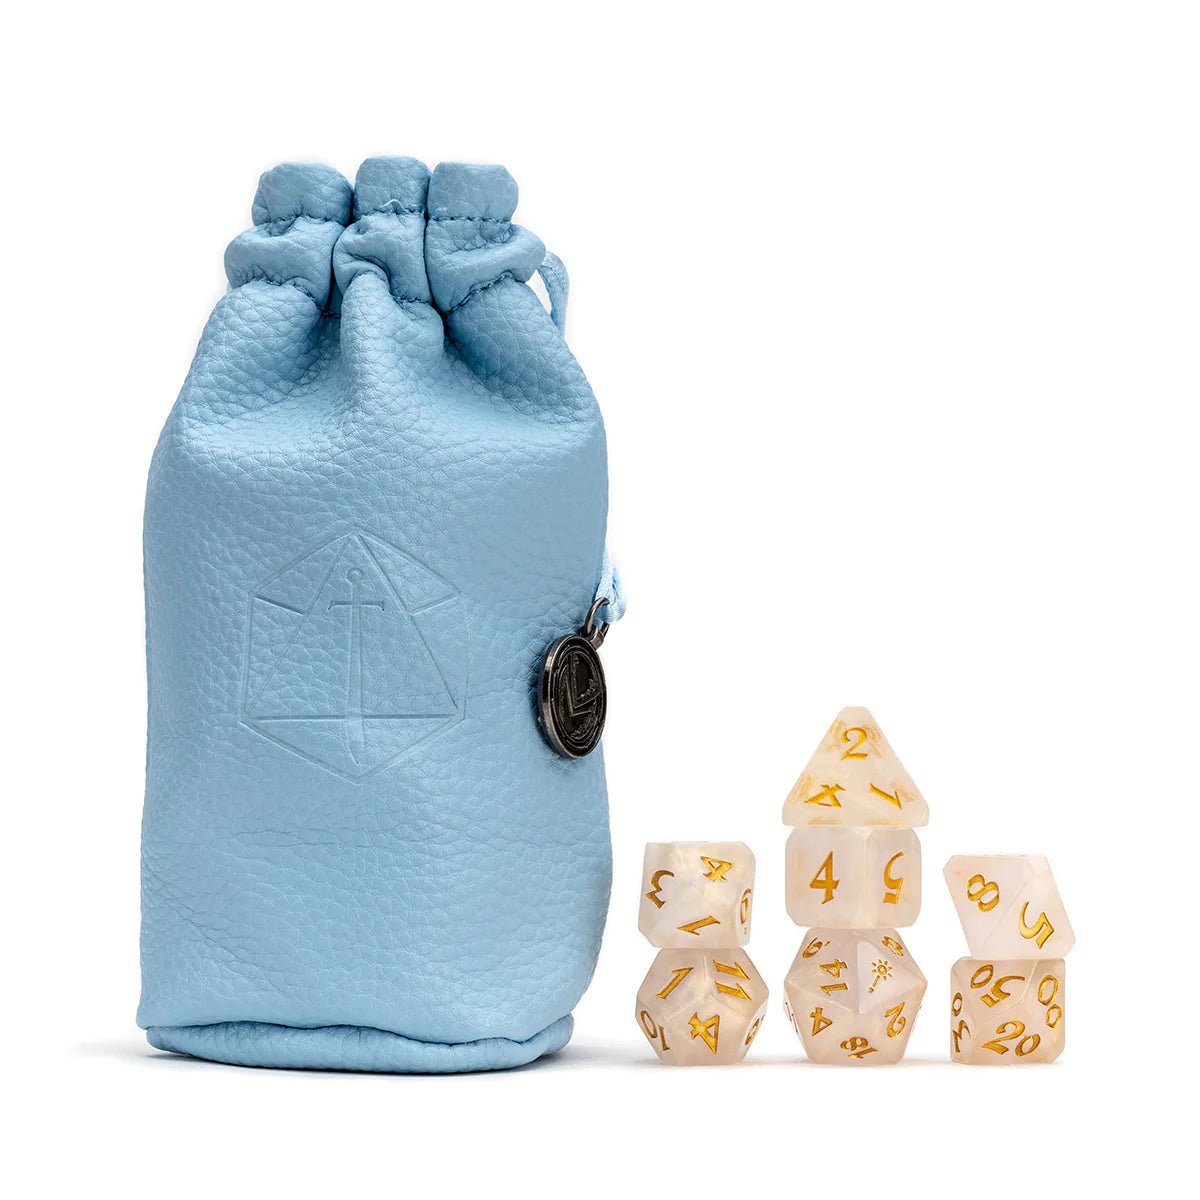 Vox Machina Dice Set: Pike Trickfoot (Light Blue/Pearl) - The Fourth Place